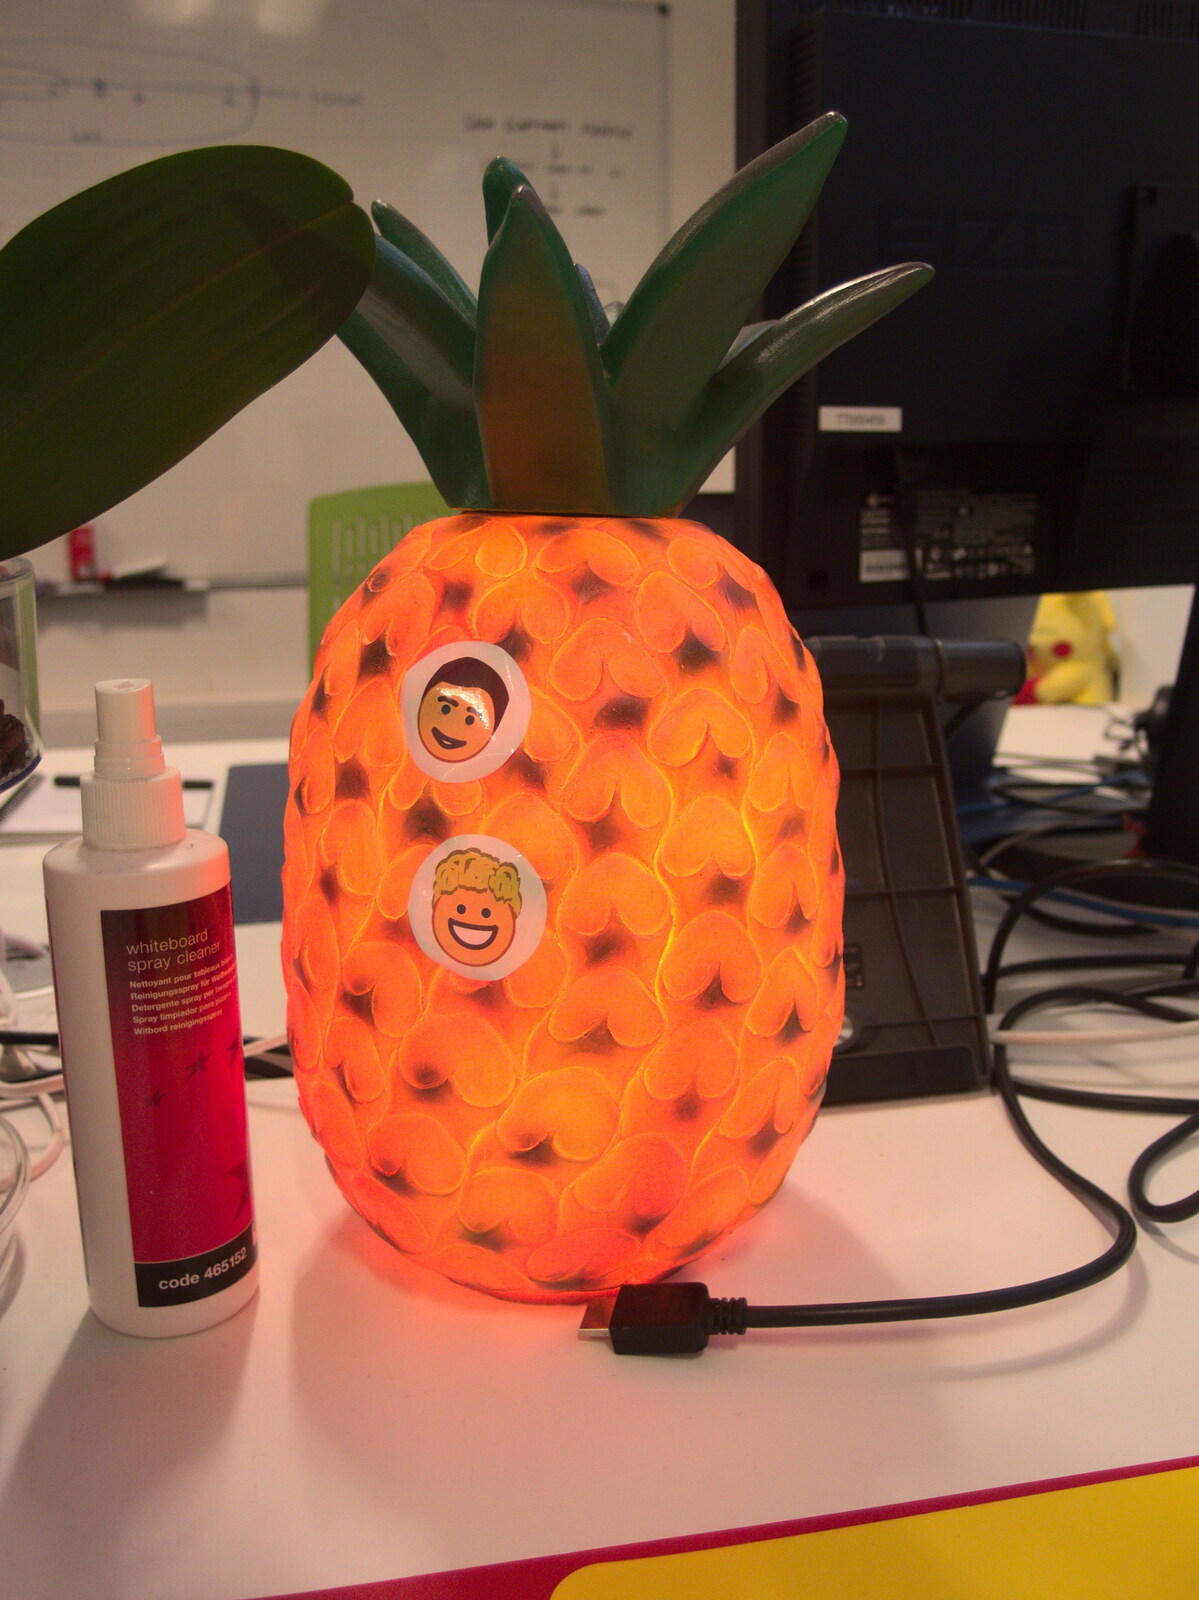 A light-up pineapple from Innovation Week and a Walk Around the South Bank, Southwark - 8th December 2016